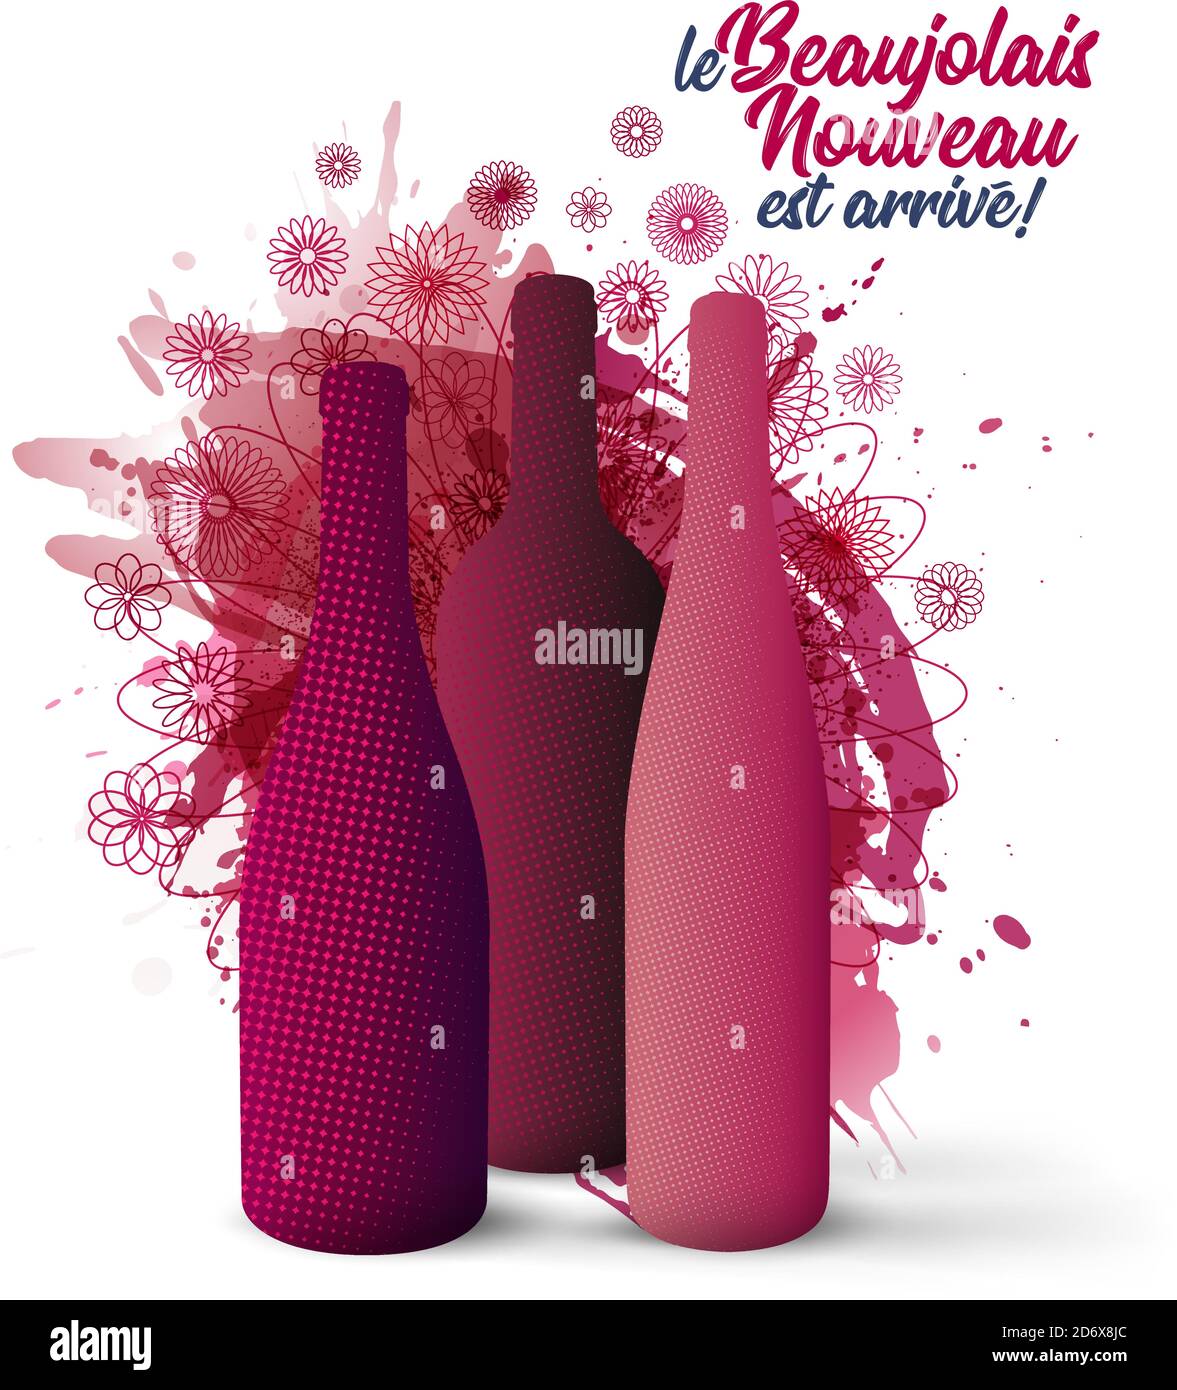 Illustration with volume of wine bottles. text in French 'le Beaujolais Nouveau est arrivé', the new Beaujolais has arrived. background wine stains an Stock Vector